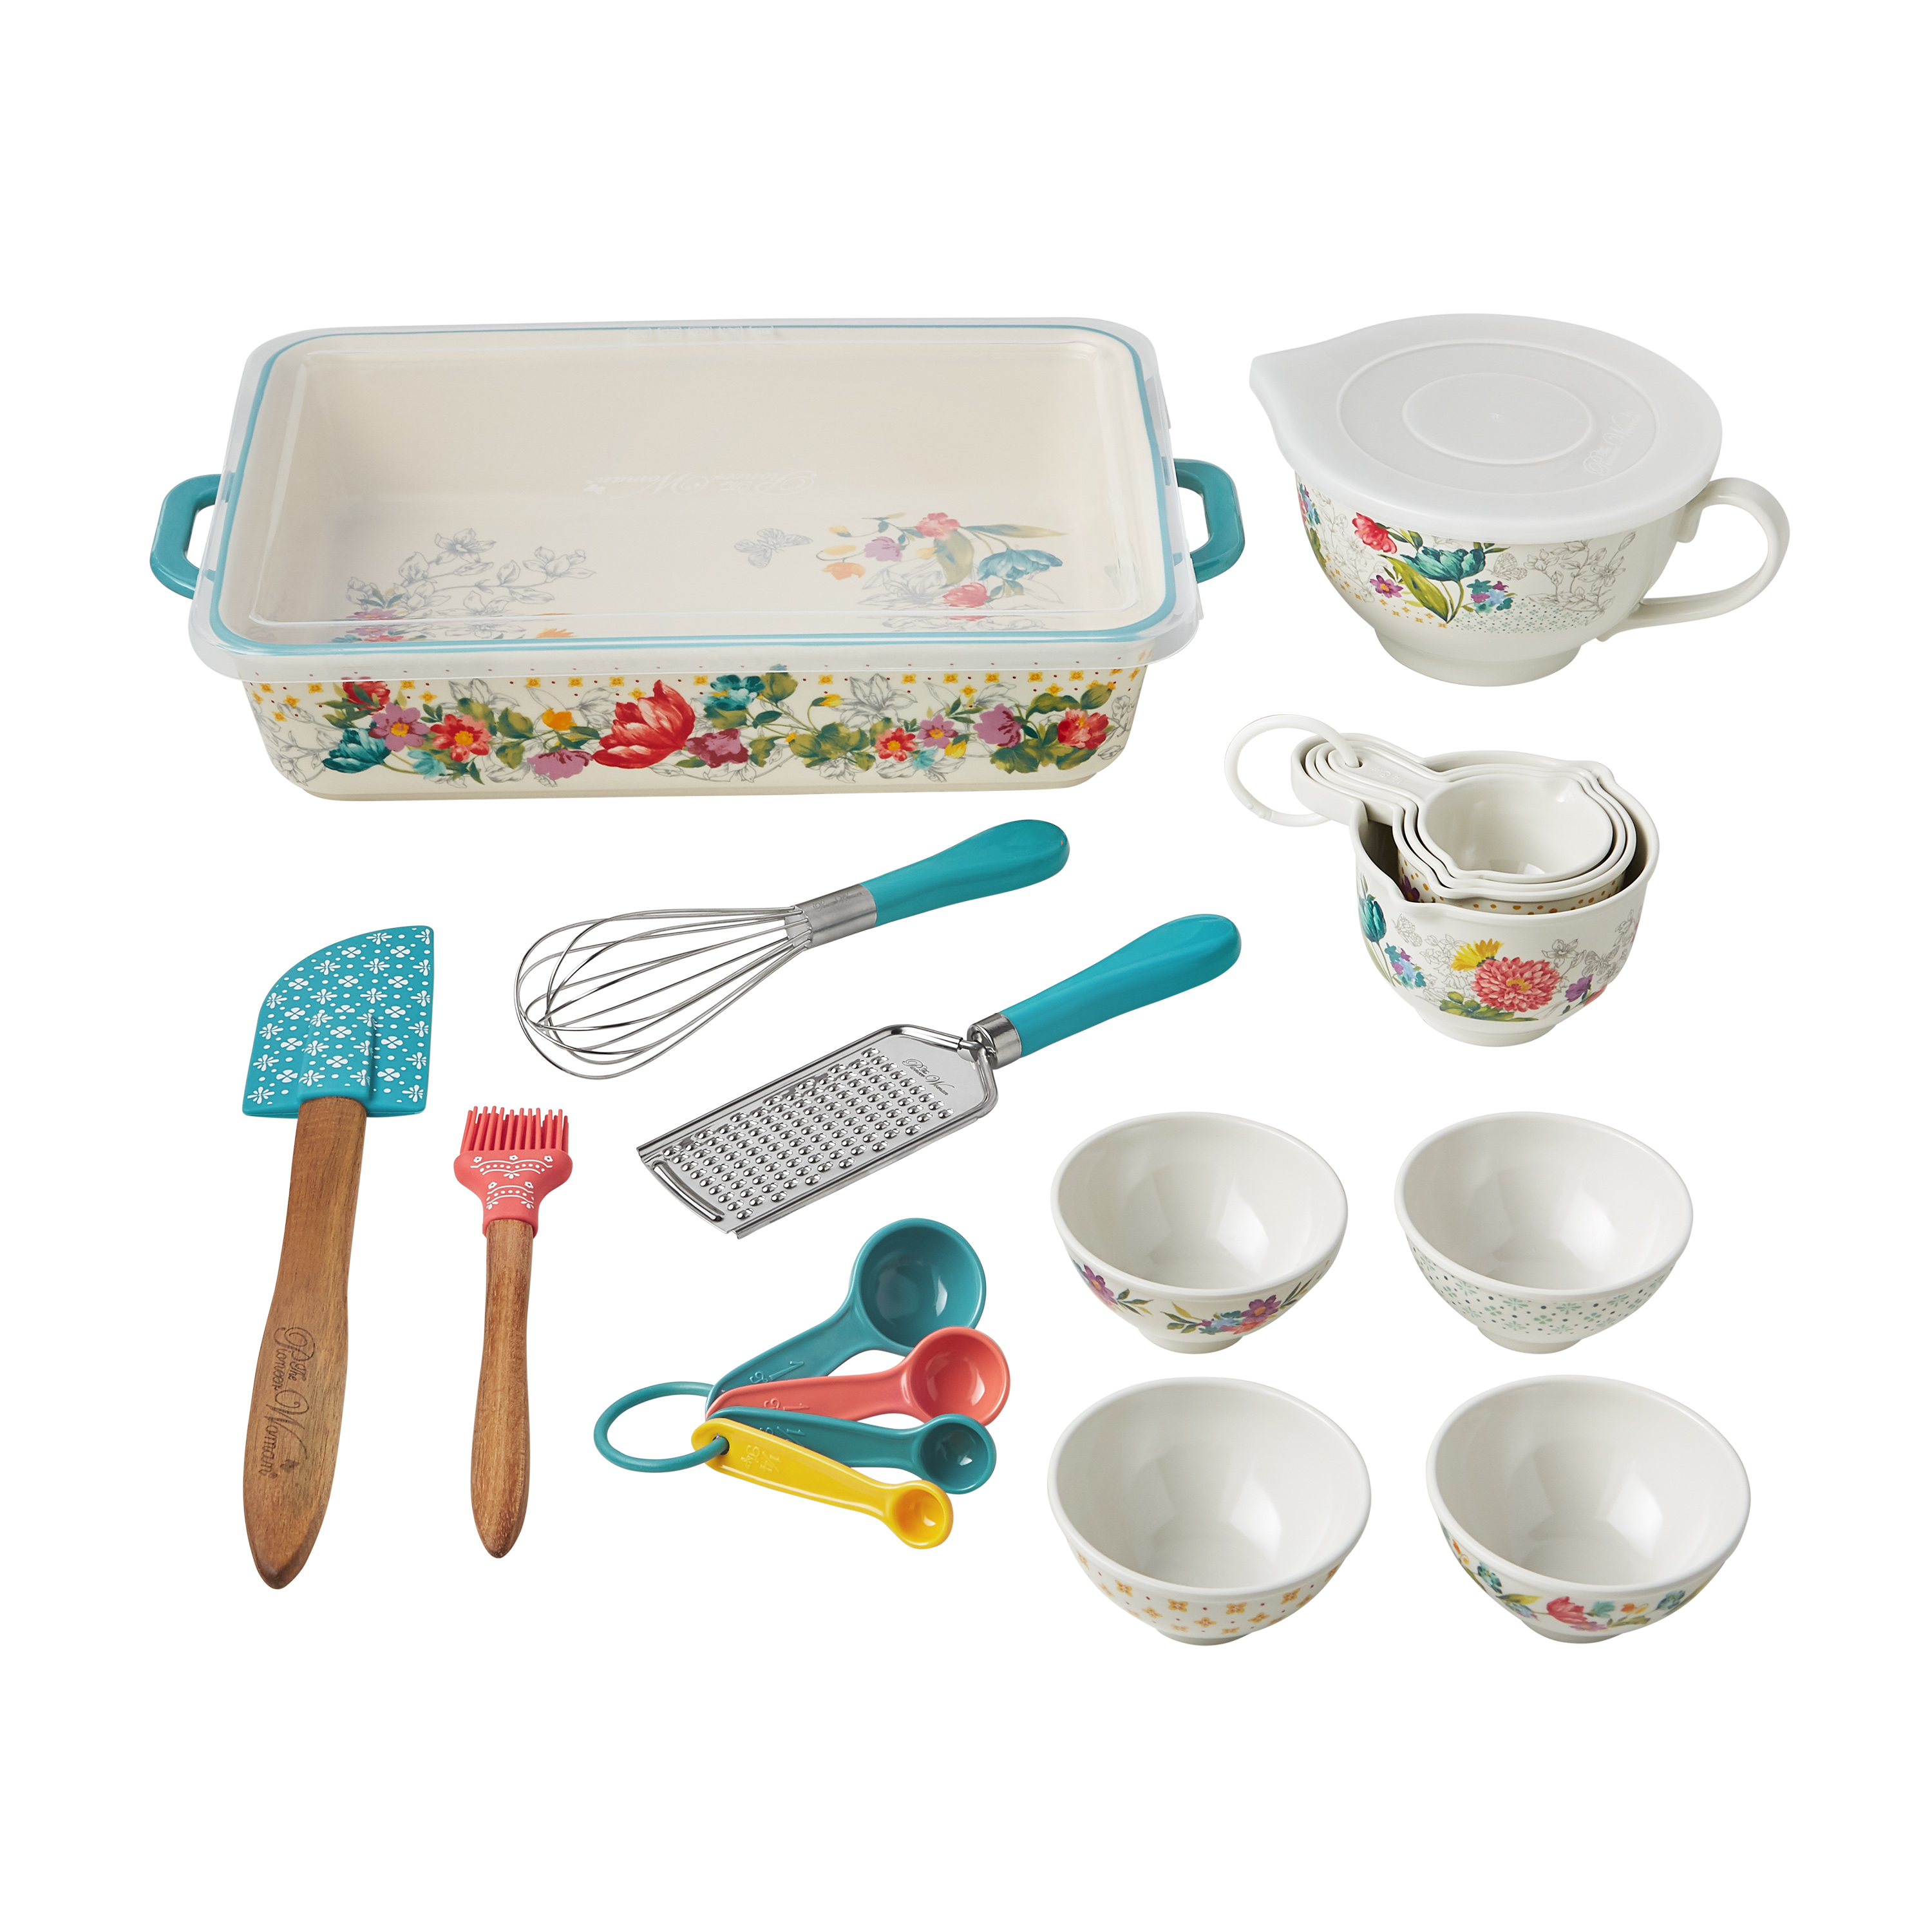 The Pioneer Woman Blooming Bouquet 20-Piece Bake & Prep Set with Baking Dish & Measuring Cups - image 1 of 8